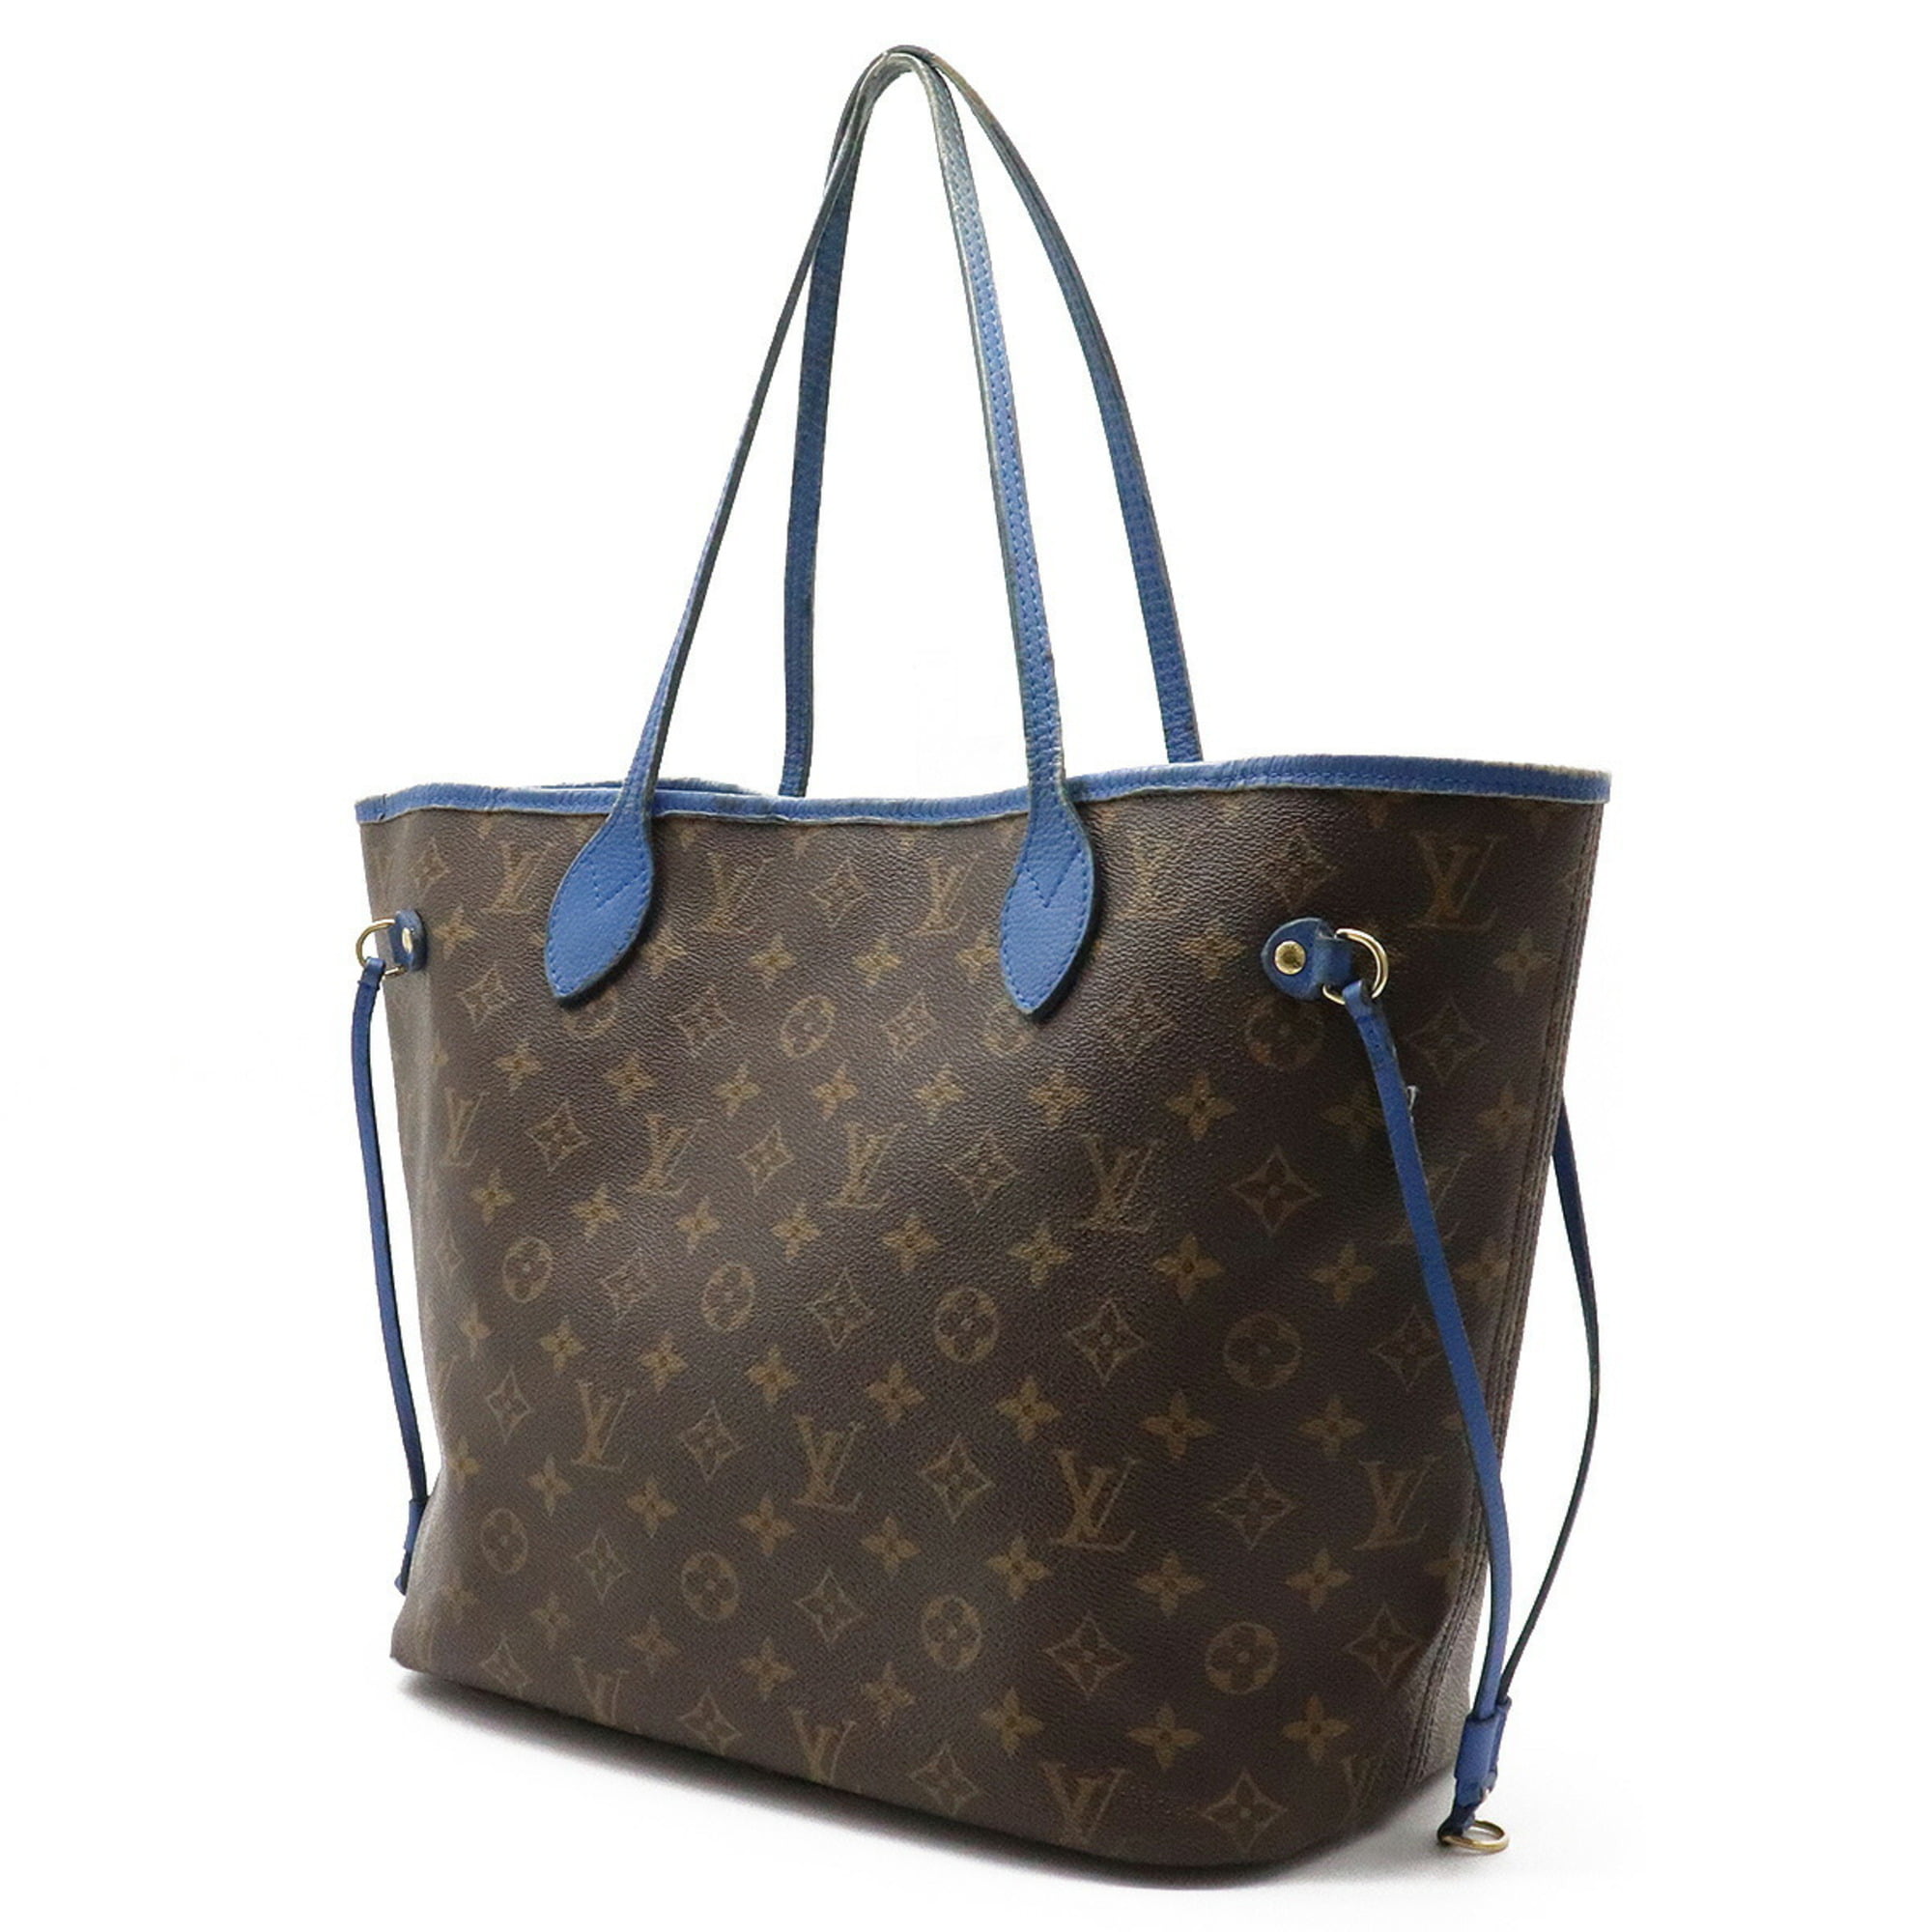 Louis Vuitton - Authenticated Neverfull Handbag - Leather Green for Women, Good Condition